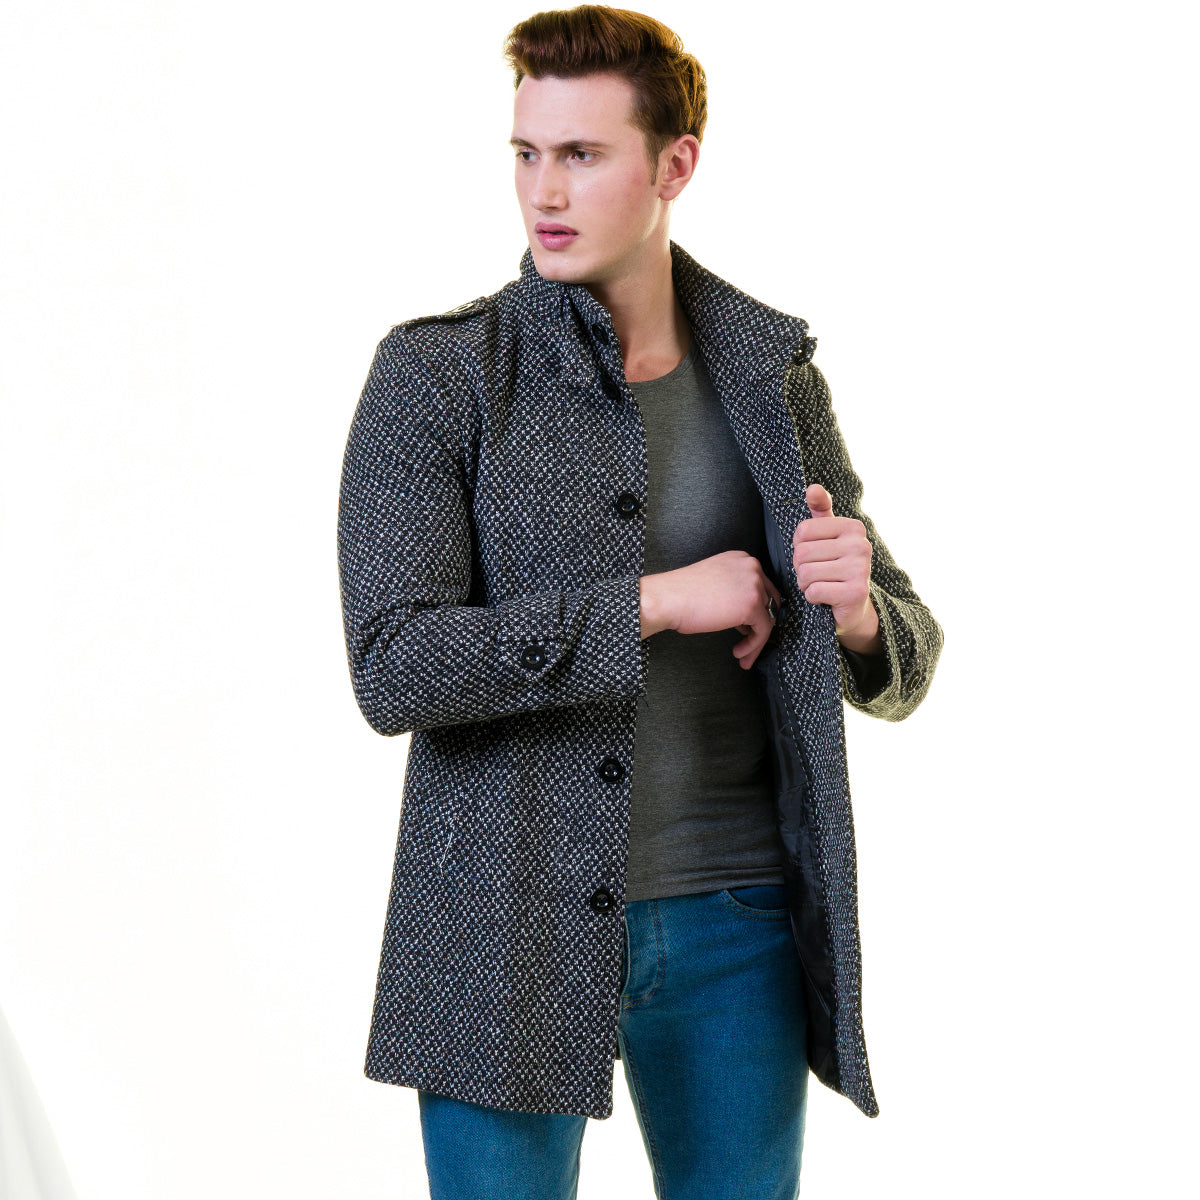 Men's European Black and White Dotted Wool Coat Jacket Tailor fit Fine Luxury Quality Work and Casual